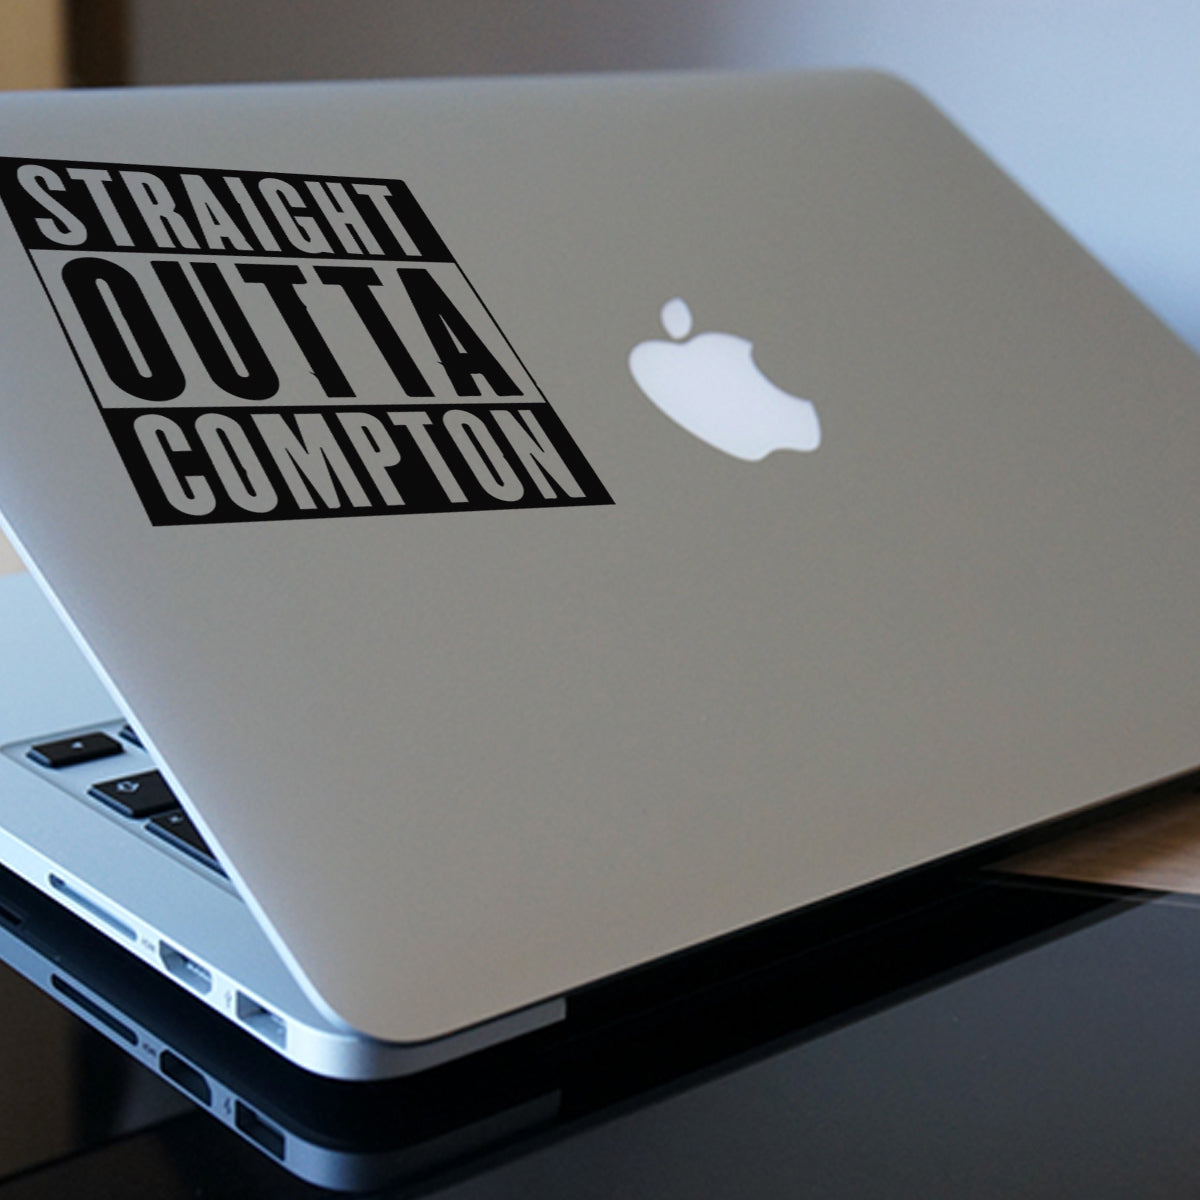 Straight Outta Compton Macbook Decal